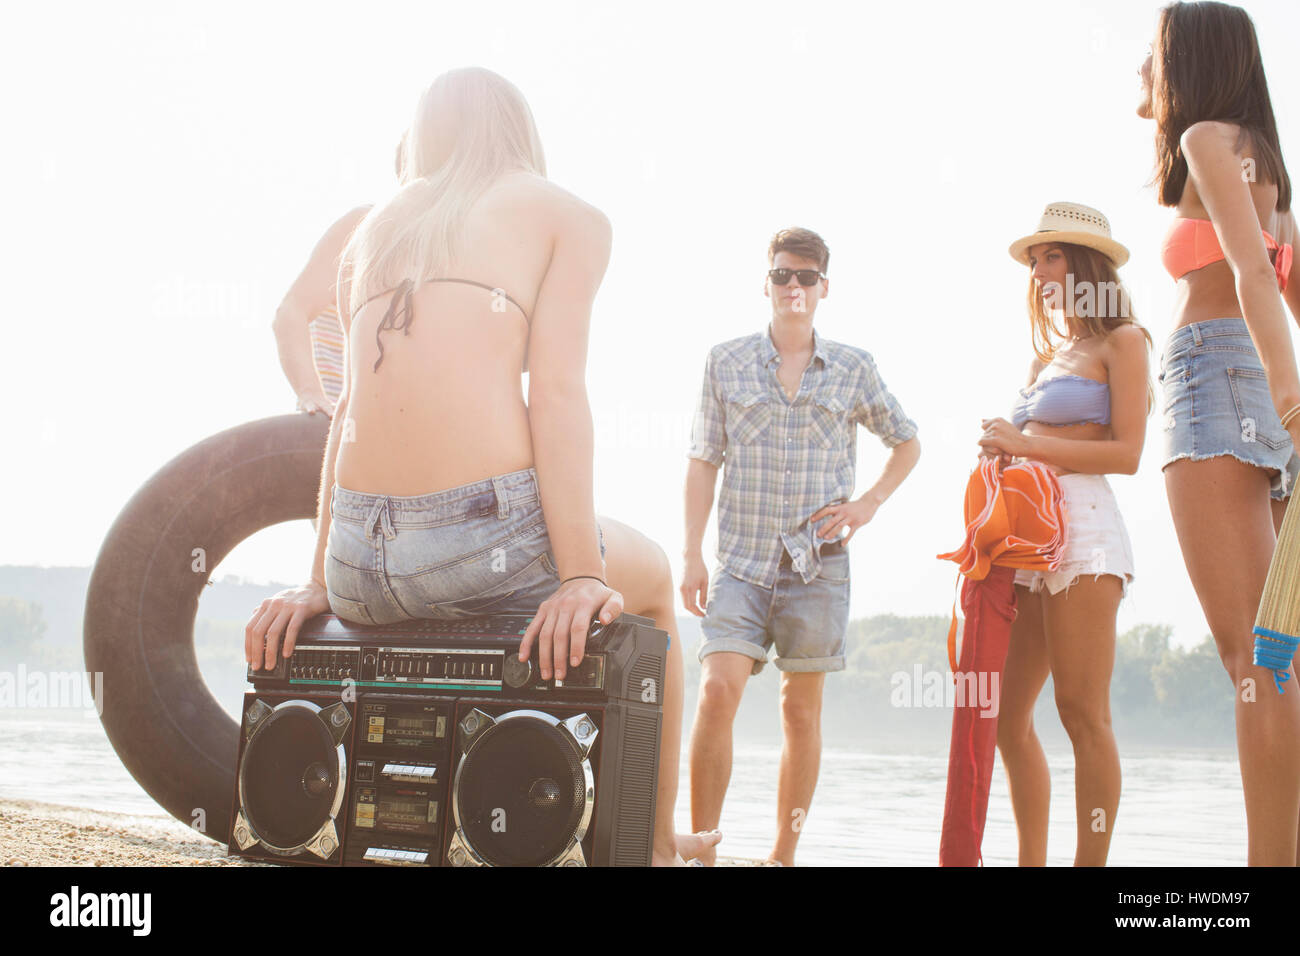 Group of friends enjoying beach party Stock Photo